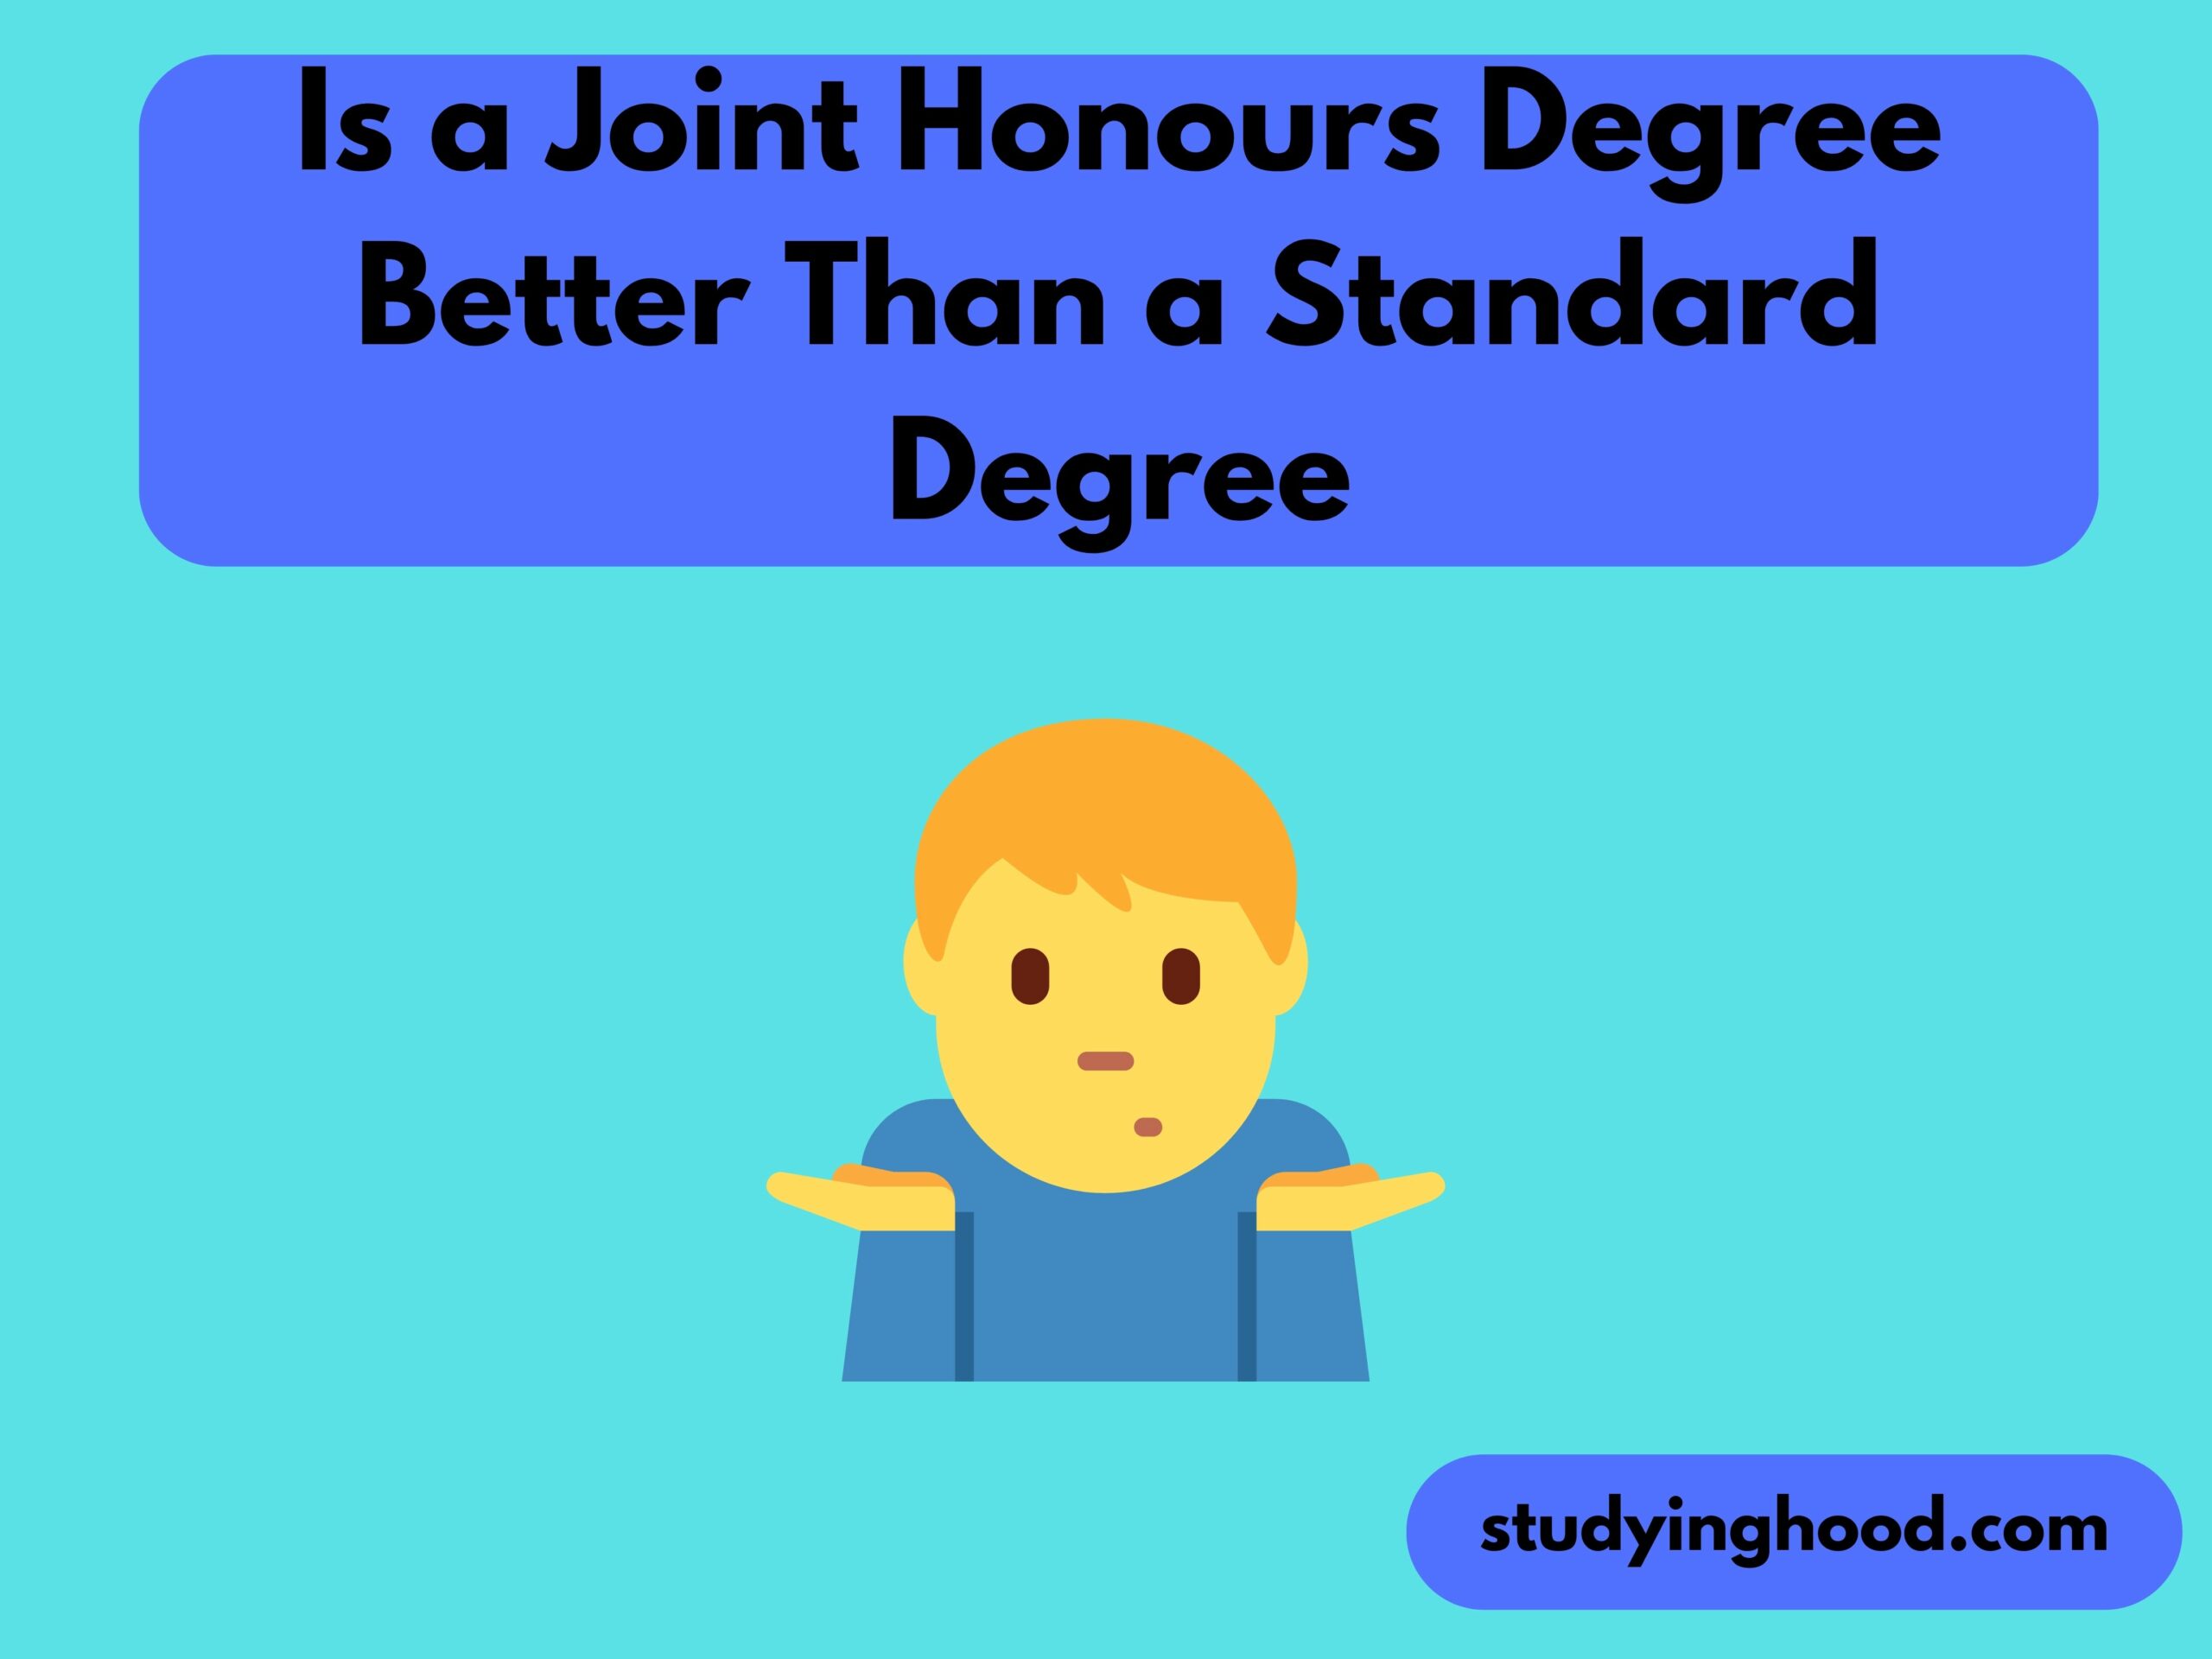 Is a Joint Honours Degree Better Than a Standard Degree